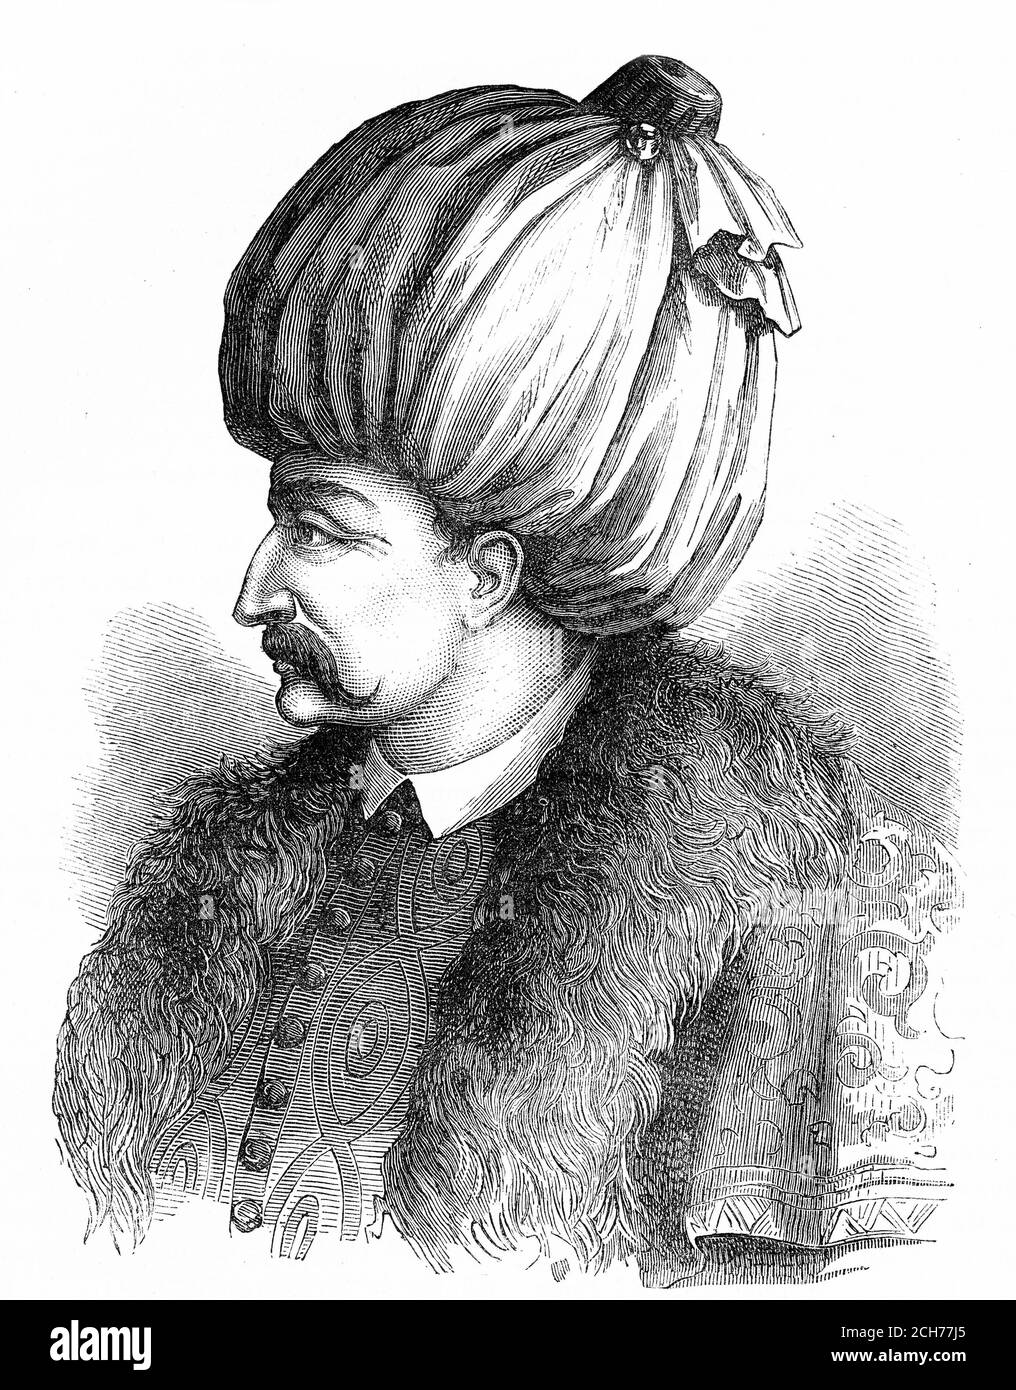 Engraving of Suleiman I (1494 – 1566), commonly known as Suleiman the Magnificent in the West and Suleiman the Lawgiver , the tenth and longest-reigning Sultan of the Ottoman Empire from 1520 until his death in 1566. illustration from 'The history of Protestantism' by James Aitken Wylie (1808-1890), pub. 1878 Stock Photo